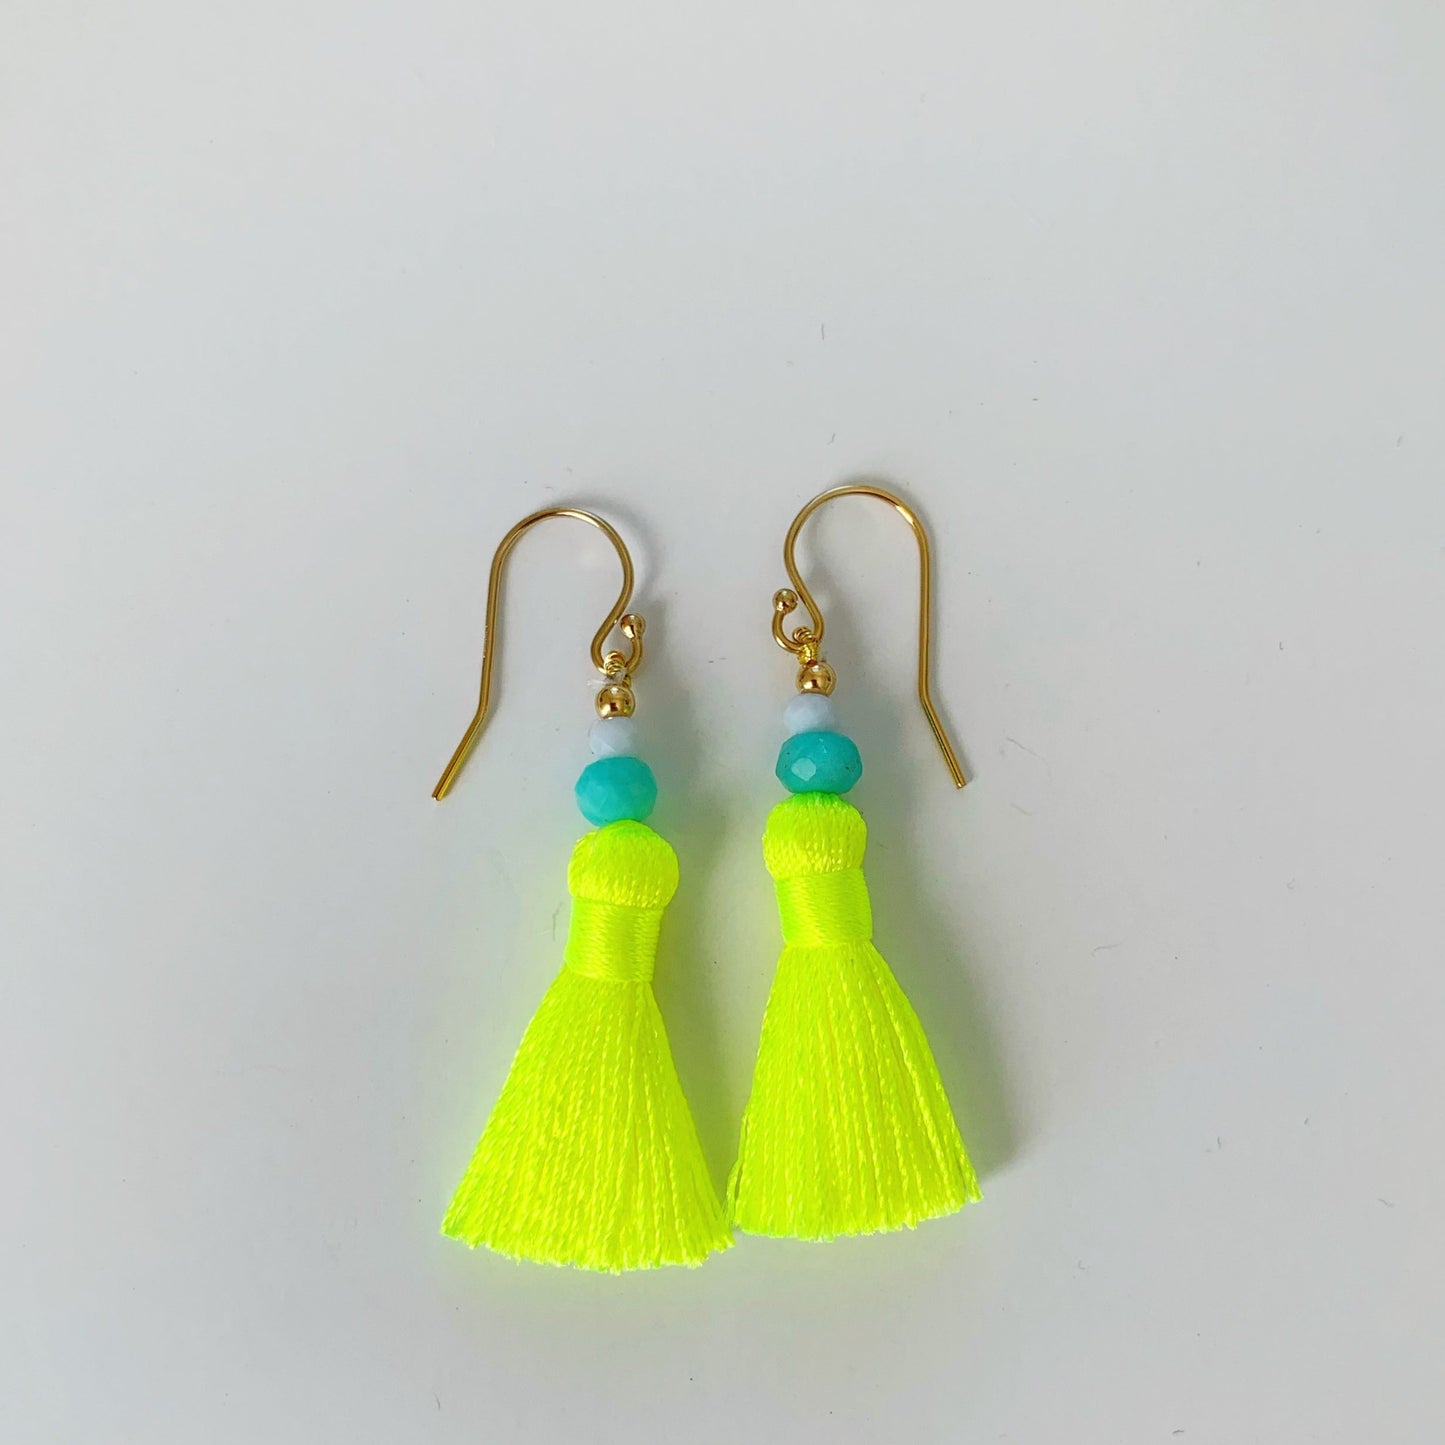 Captiva Tassel earrings by mermaids and madeleines are neon yellow tassels with amazonite, blue lace agate and 14k gold filled findings. this pair is pictured on a white surface